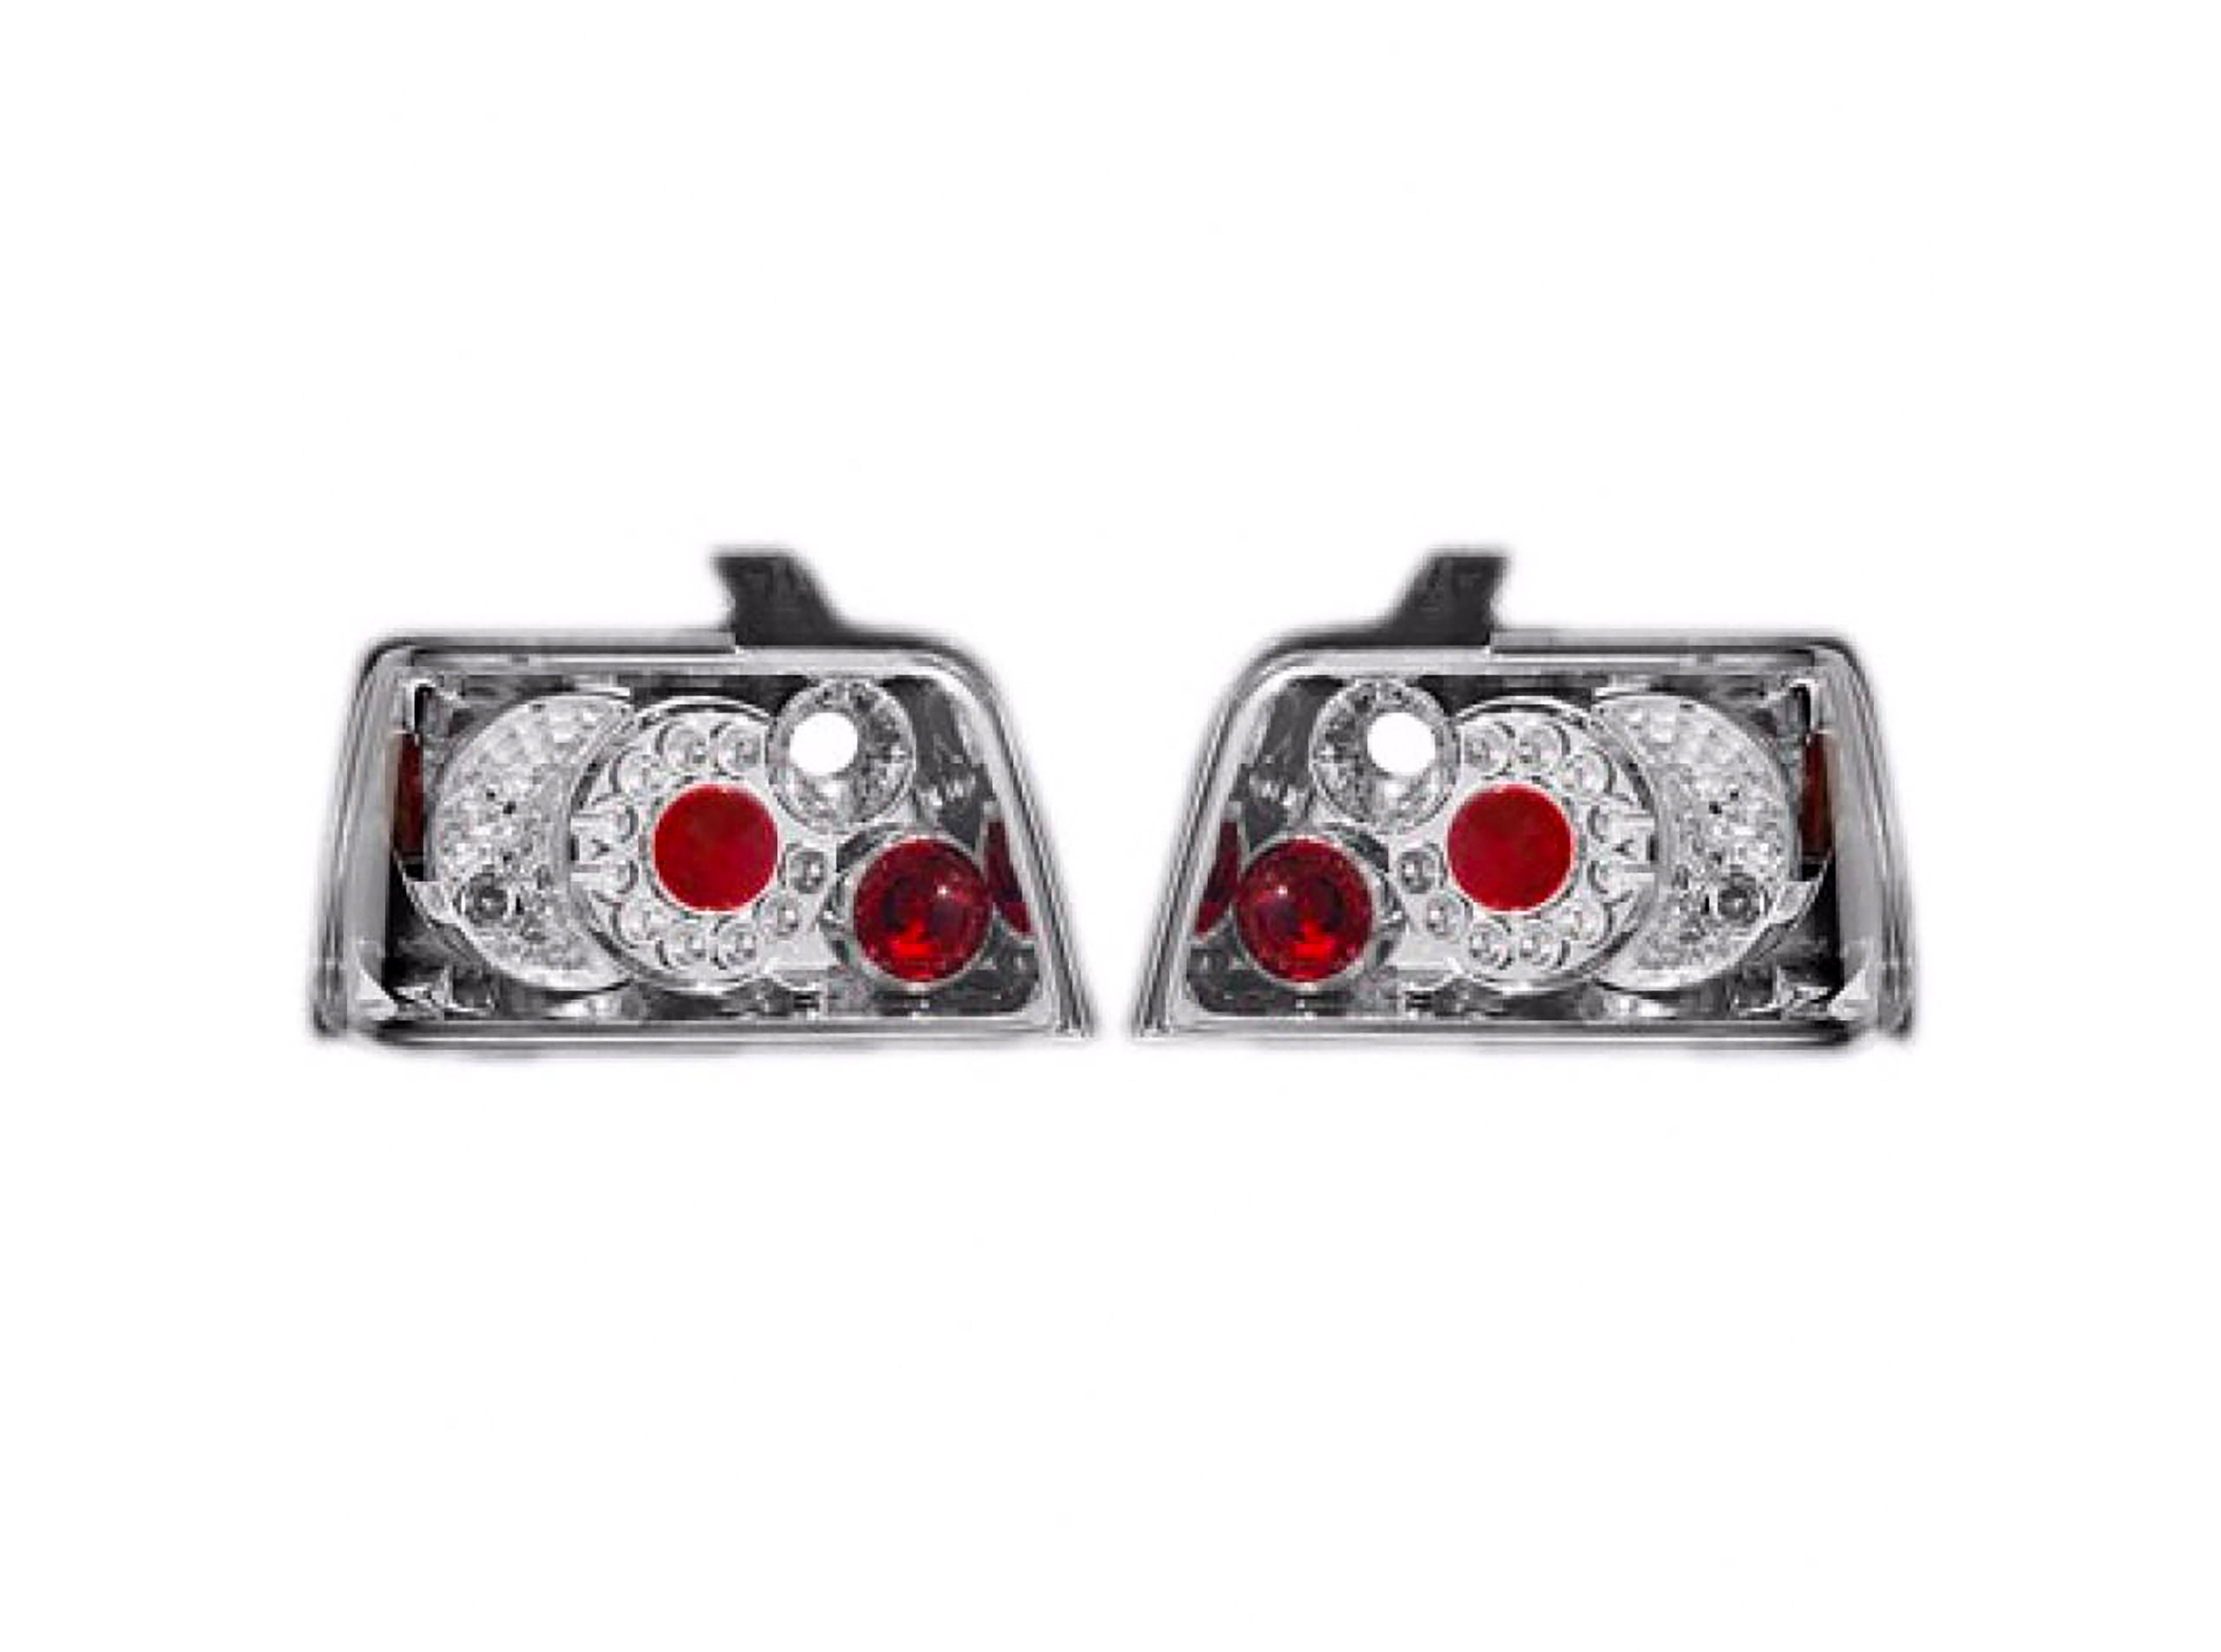 BMW E36 3-Series 4 Door 91-97 LED Taillights Clear